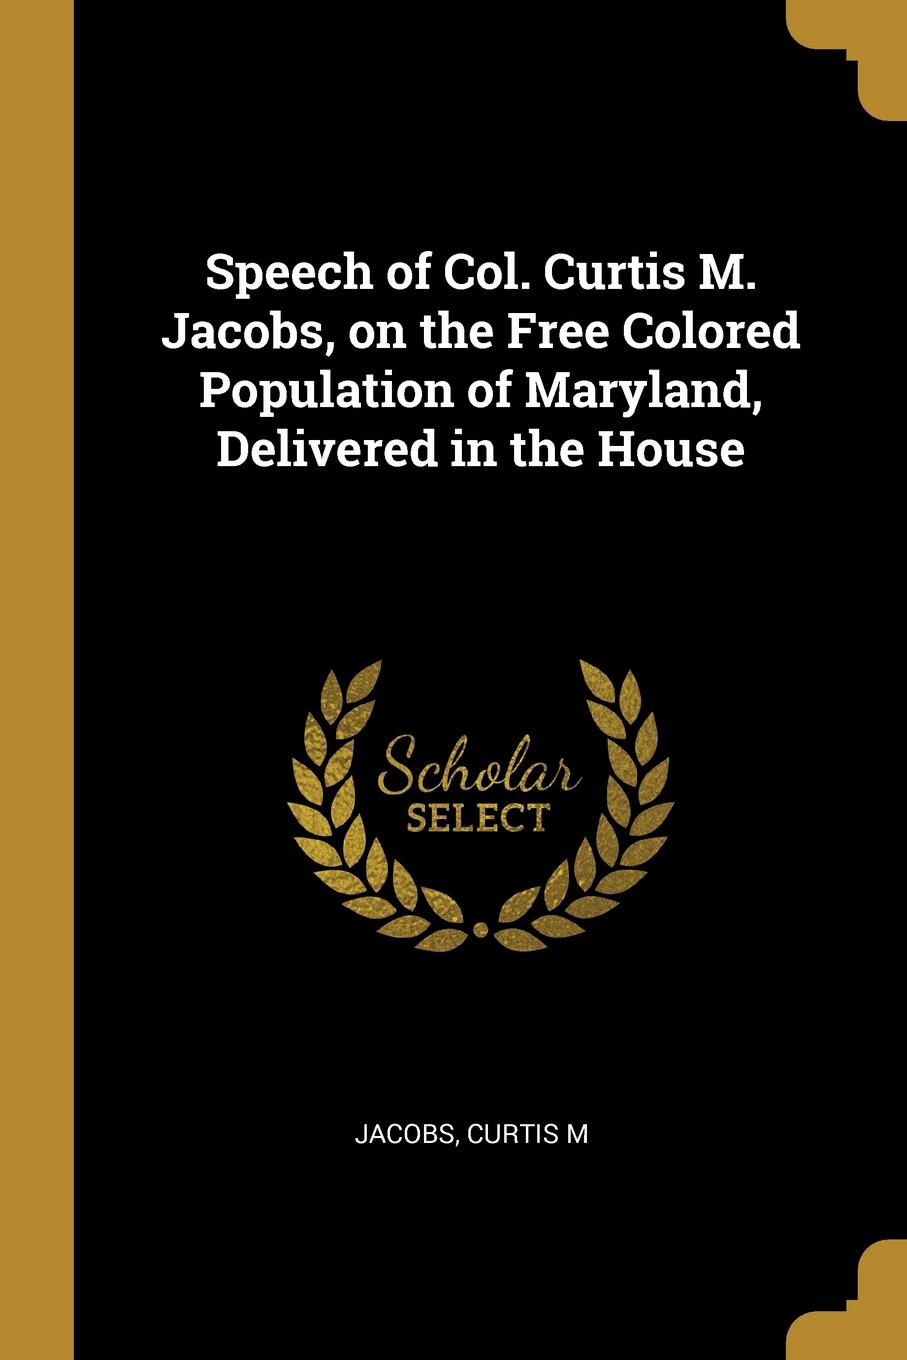 Speech of Col. Curtis M. Jacobs, on the Free Colored Population of Maryland, Delivered in the House